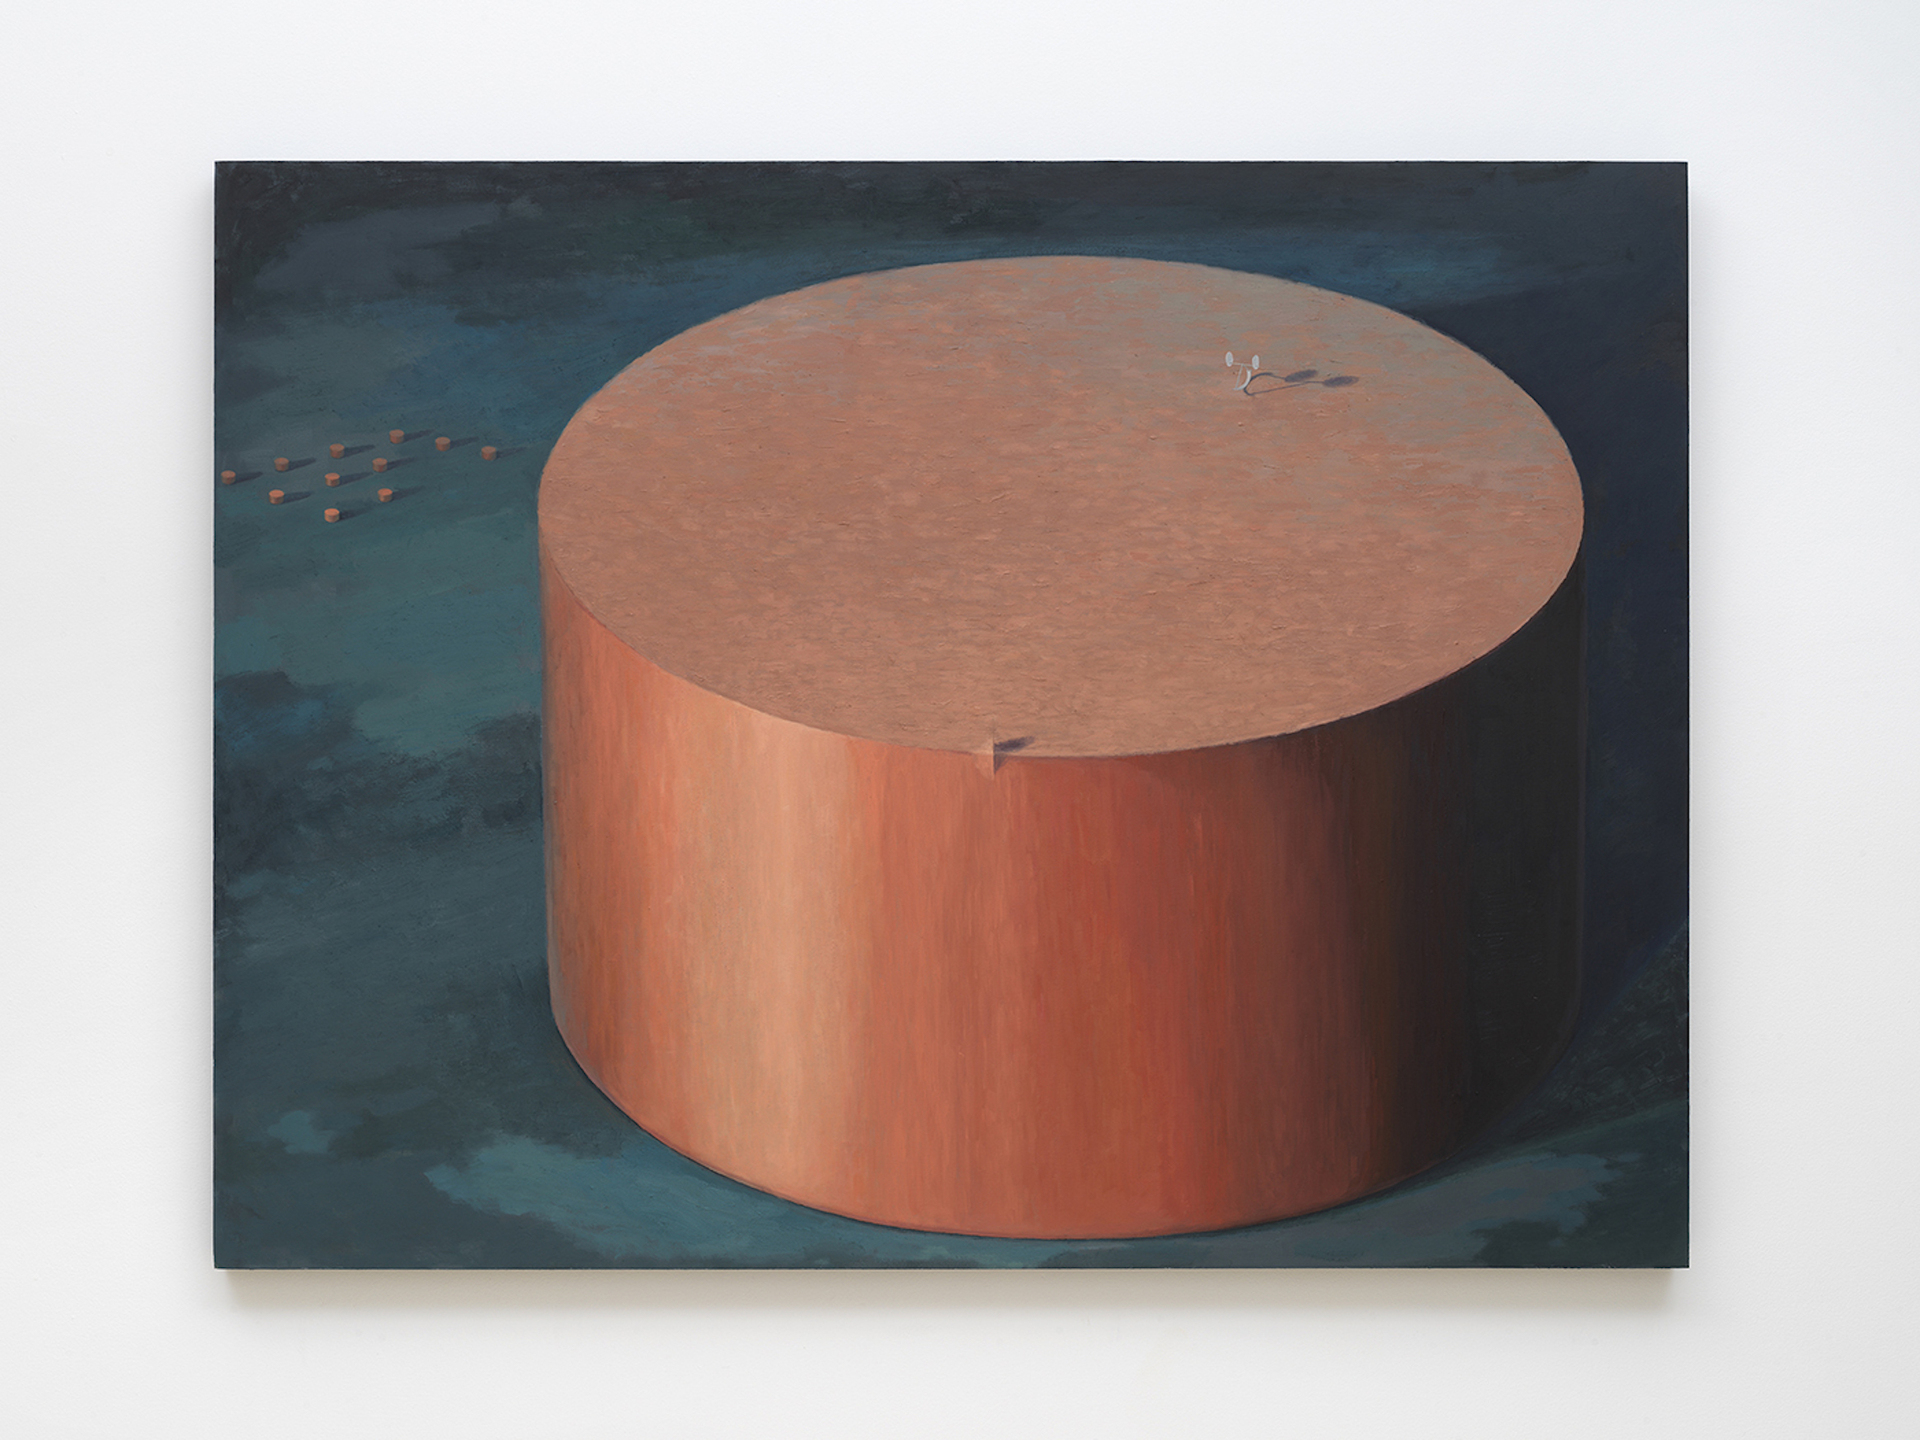 Button 003, 2020 Oil on panel 36 × 48 × 1 ½ inches (91.44 × 121.92 × 3.81 cm)